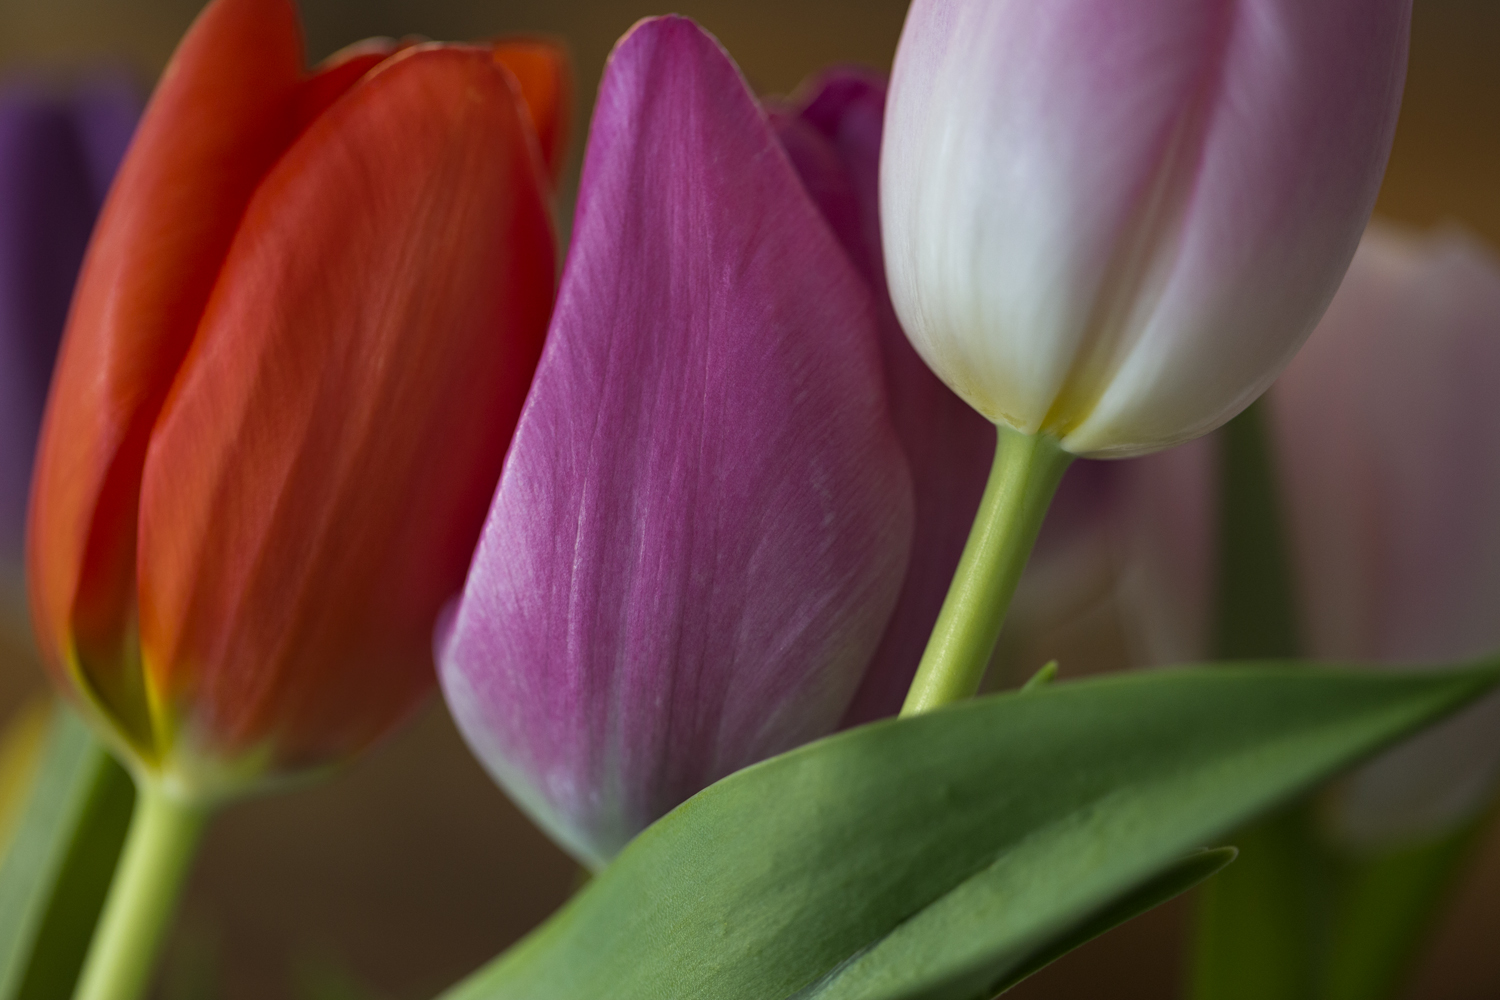 amys_many_colored_tulips_03-01-16_4250.jpg